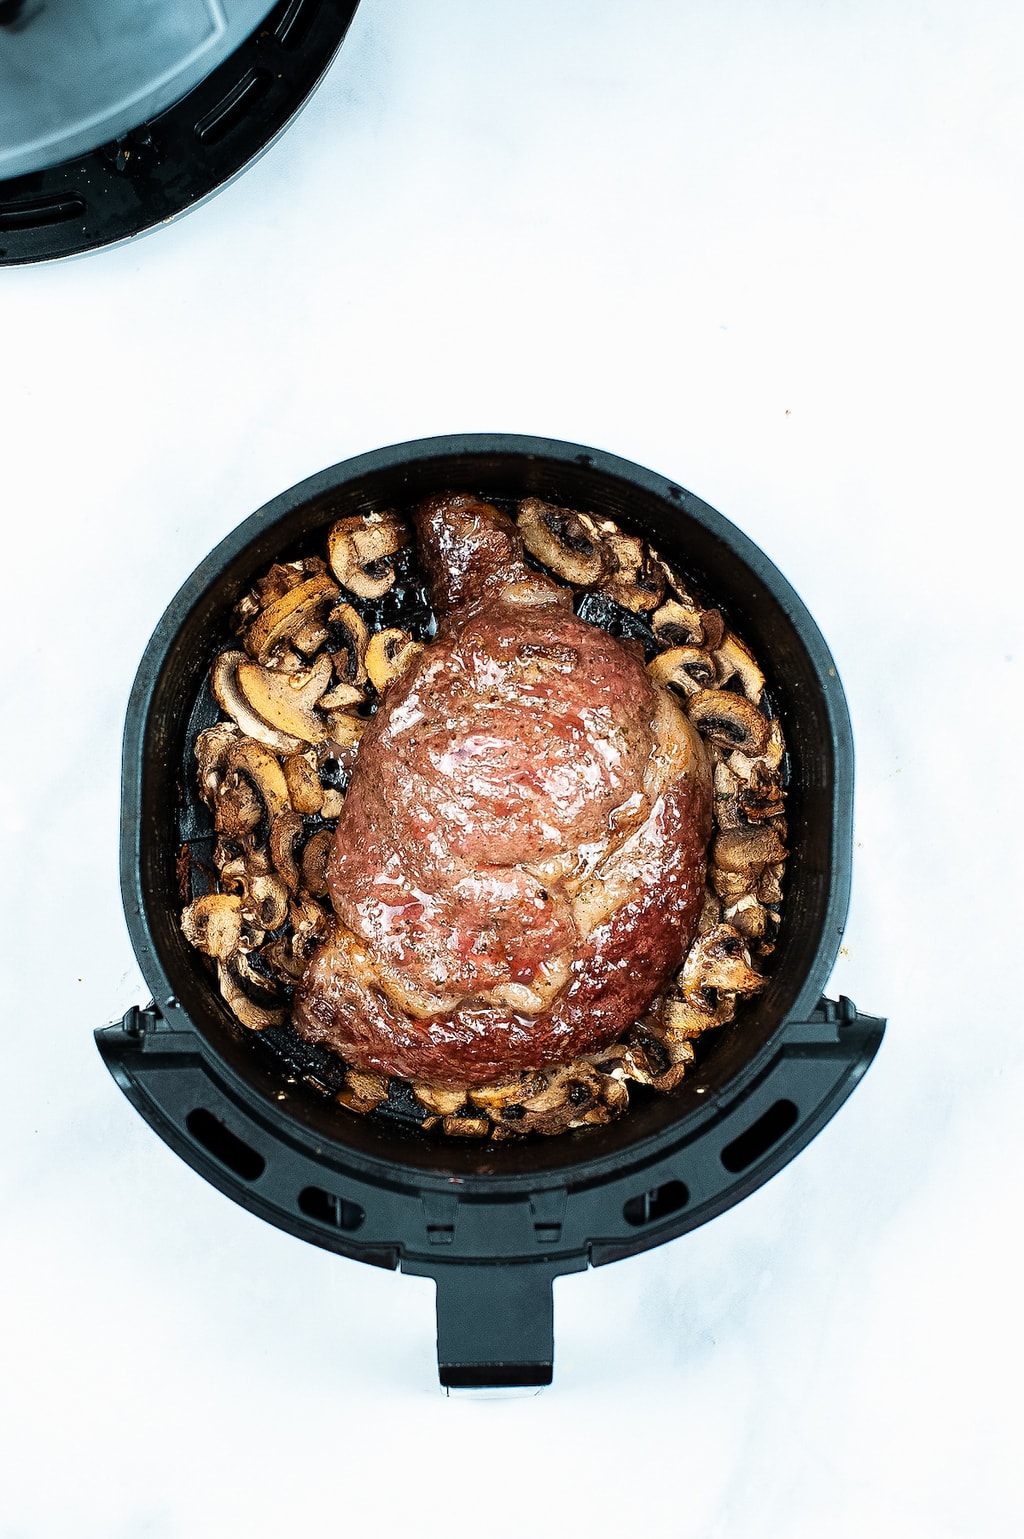 A cooked steak in side of an air fryer basket.